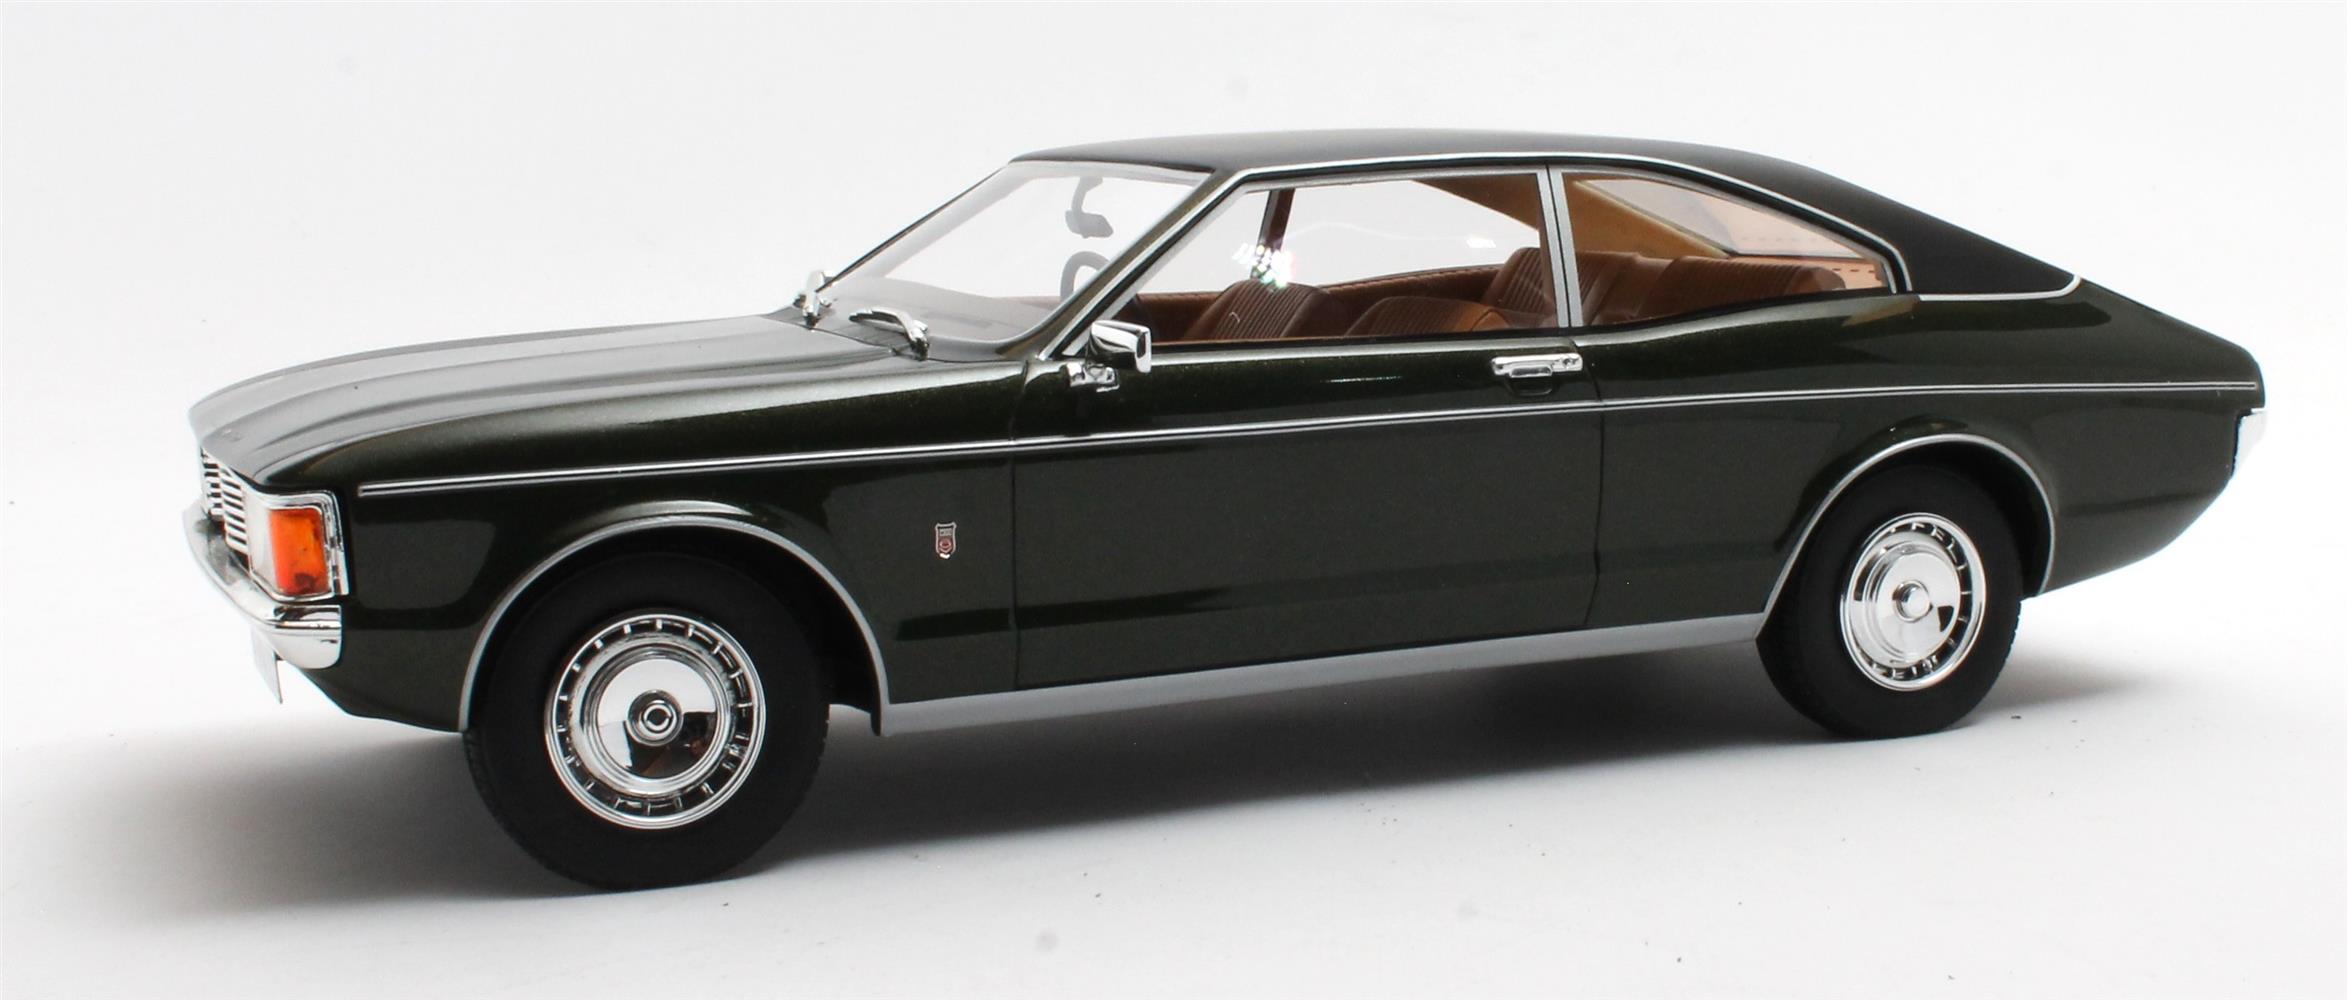 Ford Granada 1972 Coupe green met. 1:18 Cult Scale Models